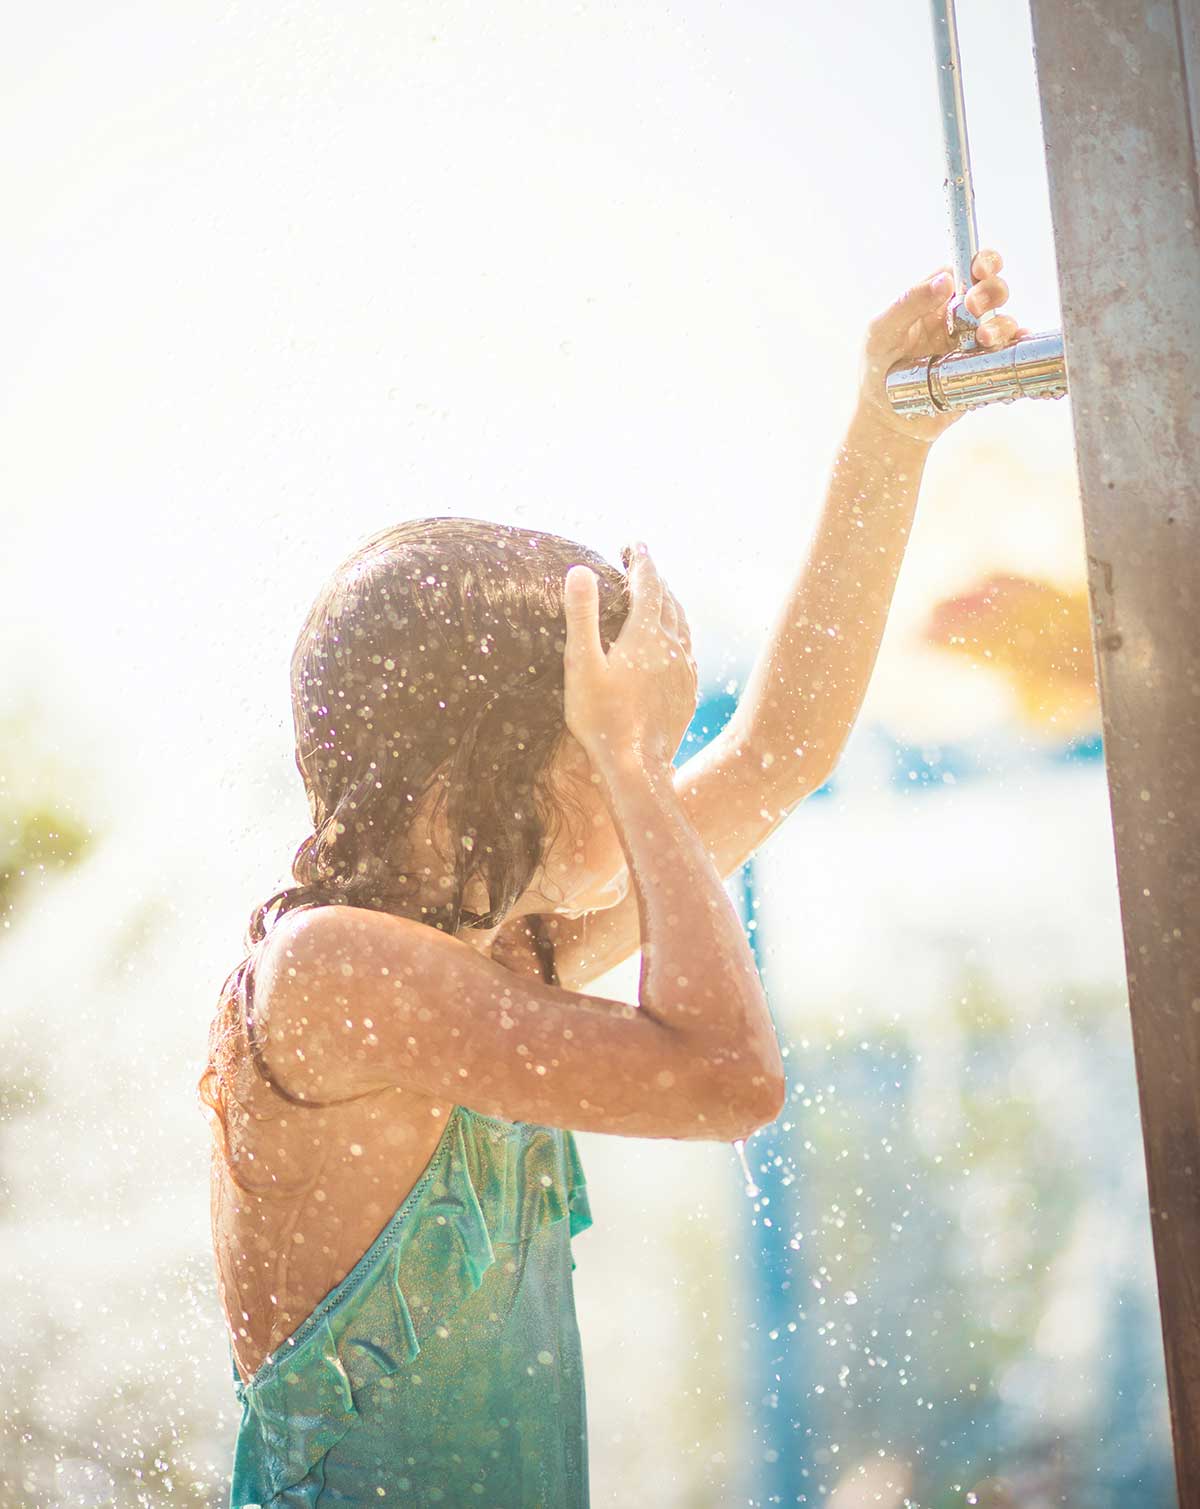 Girl takes a bath in the pool shower.